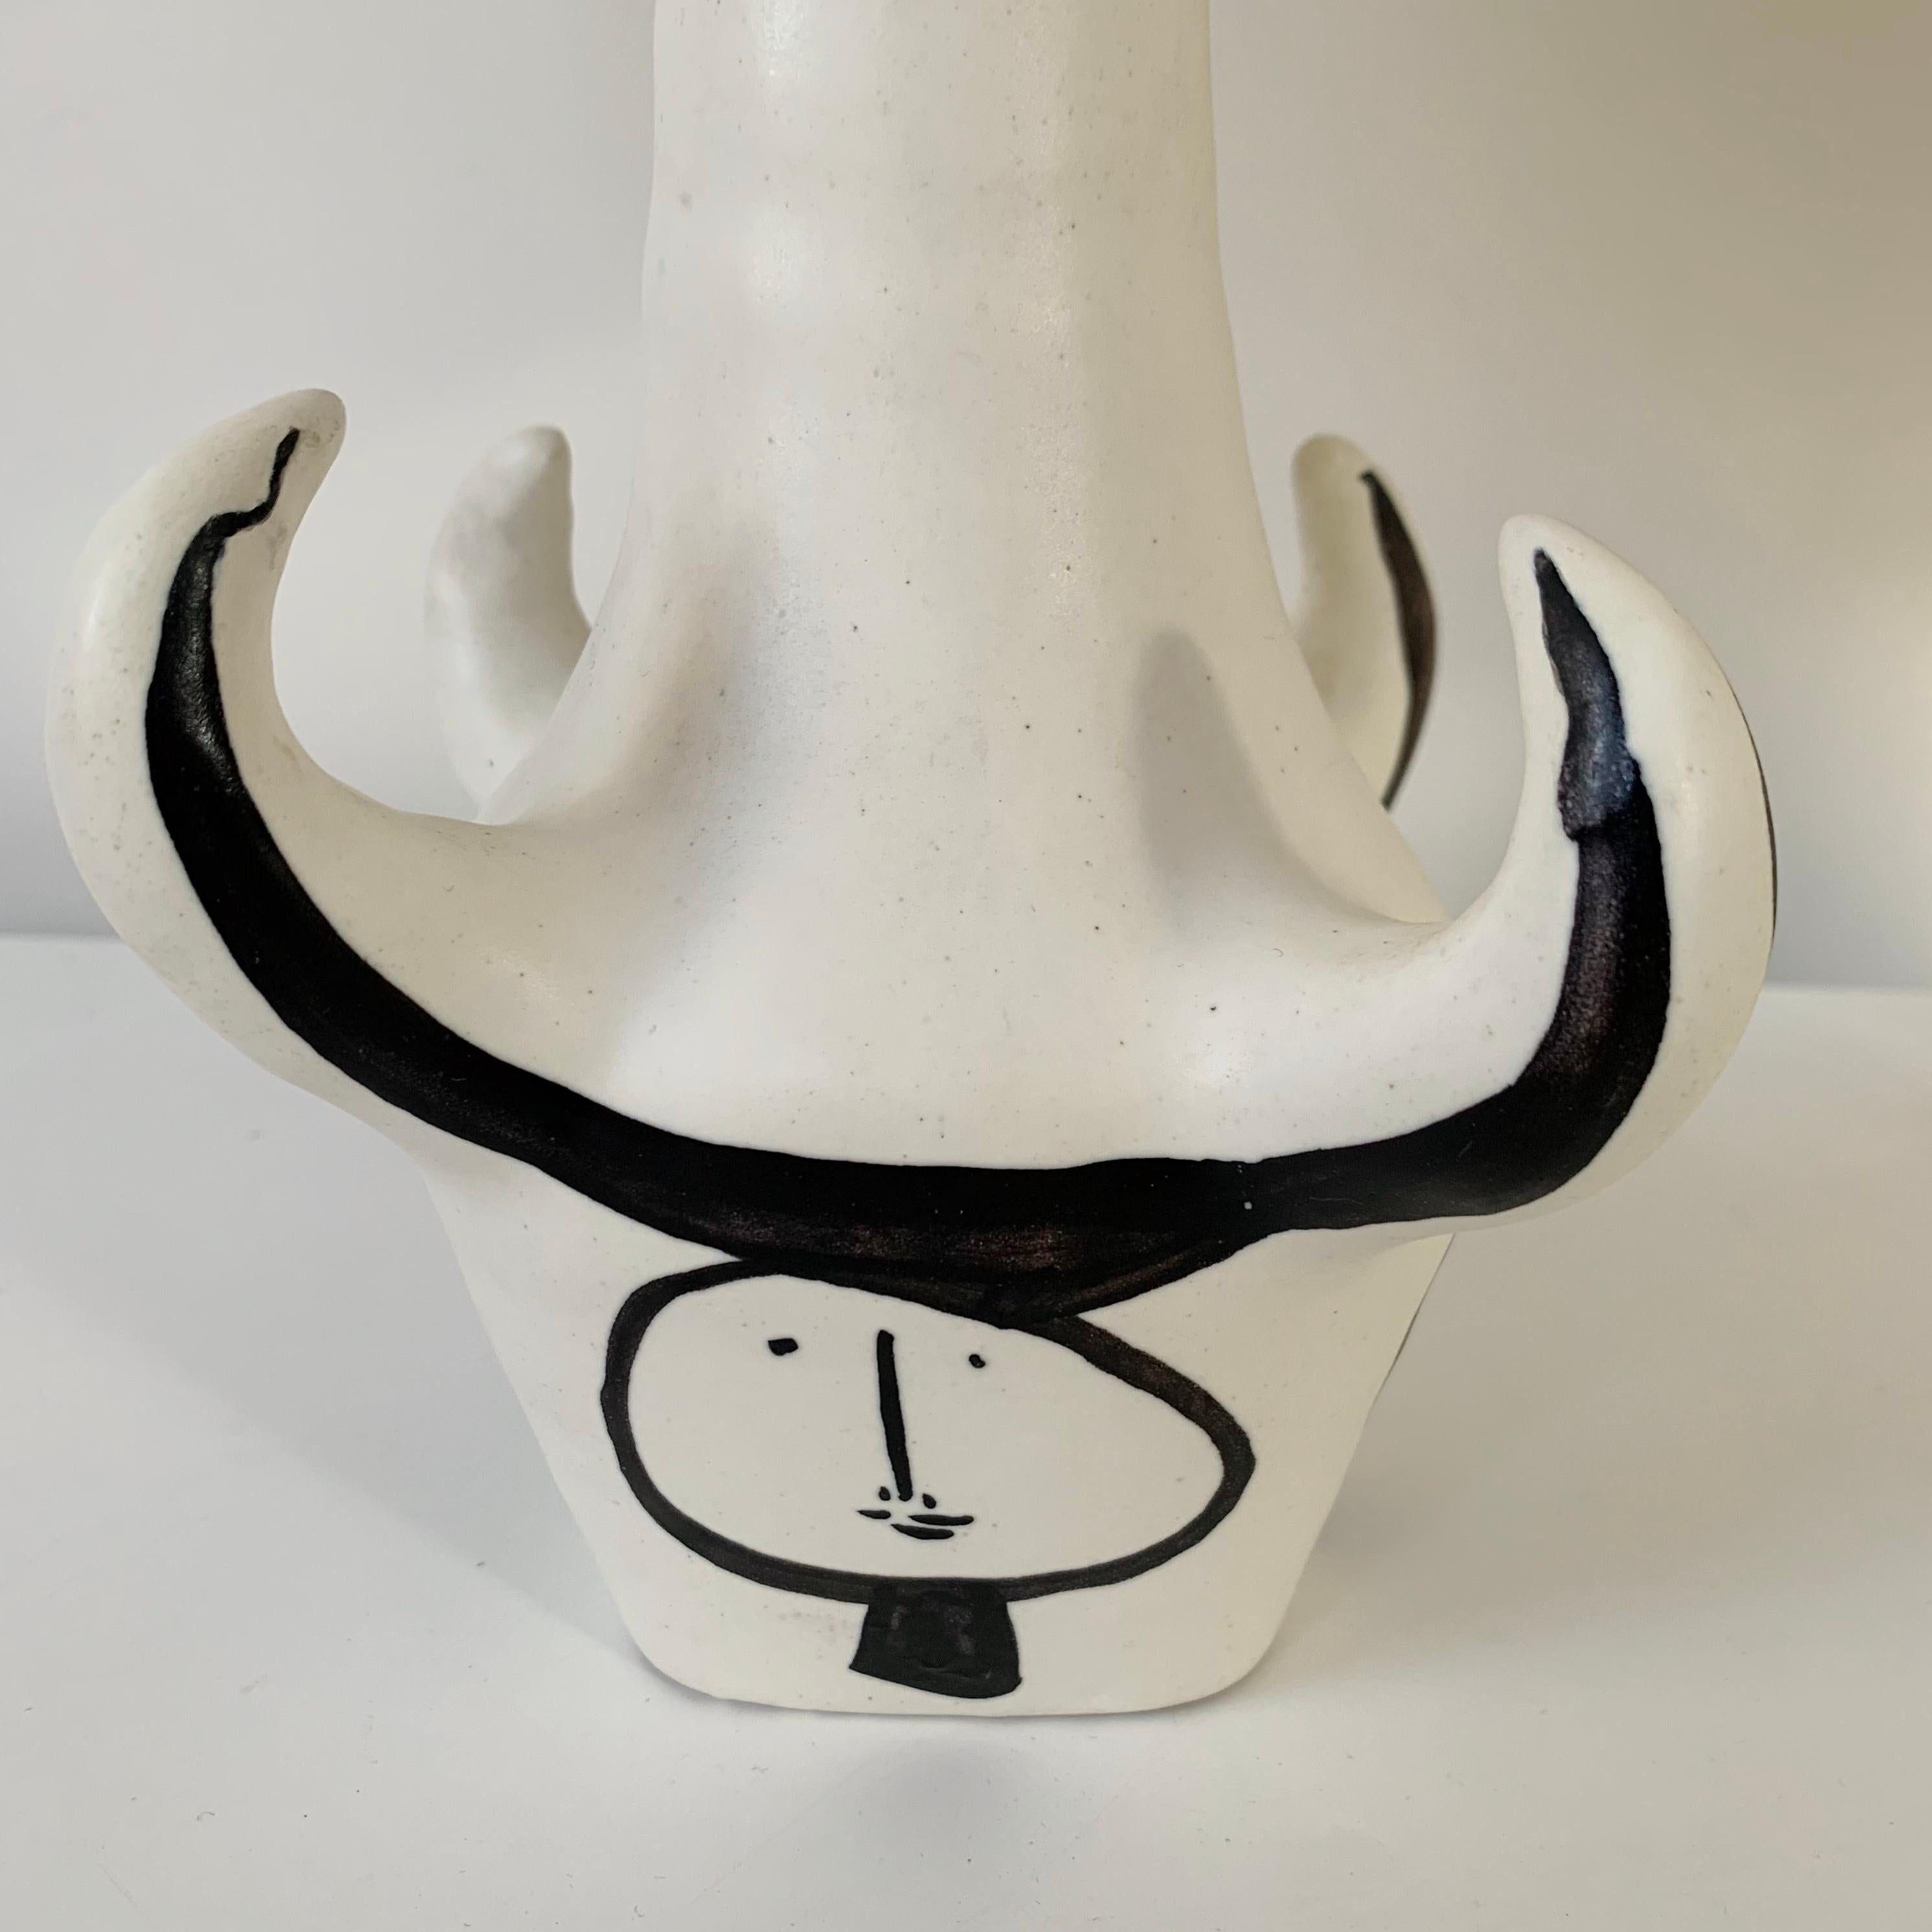  Roger Capron Pair Of 4 Horns Signed Ceramic Table Lamps , circa 1955, France. For Sale 6